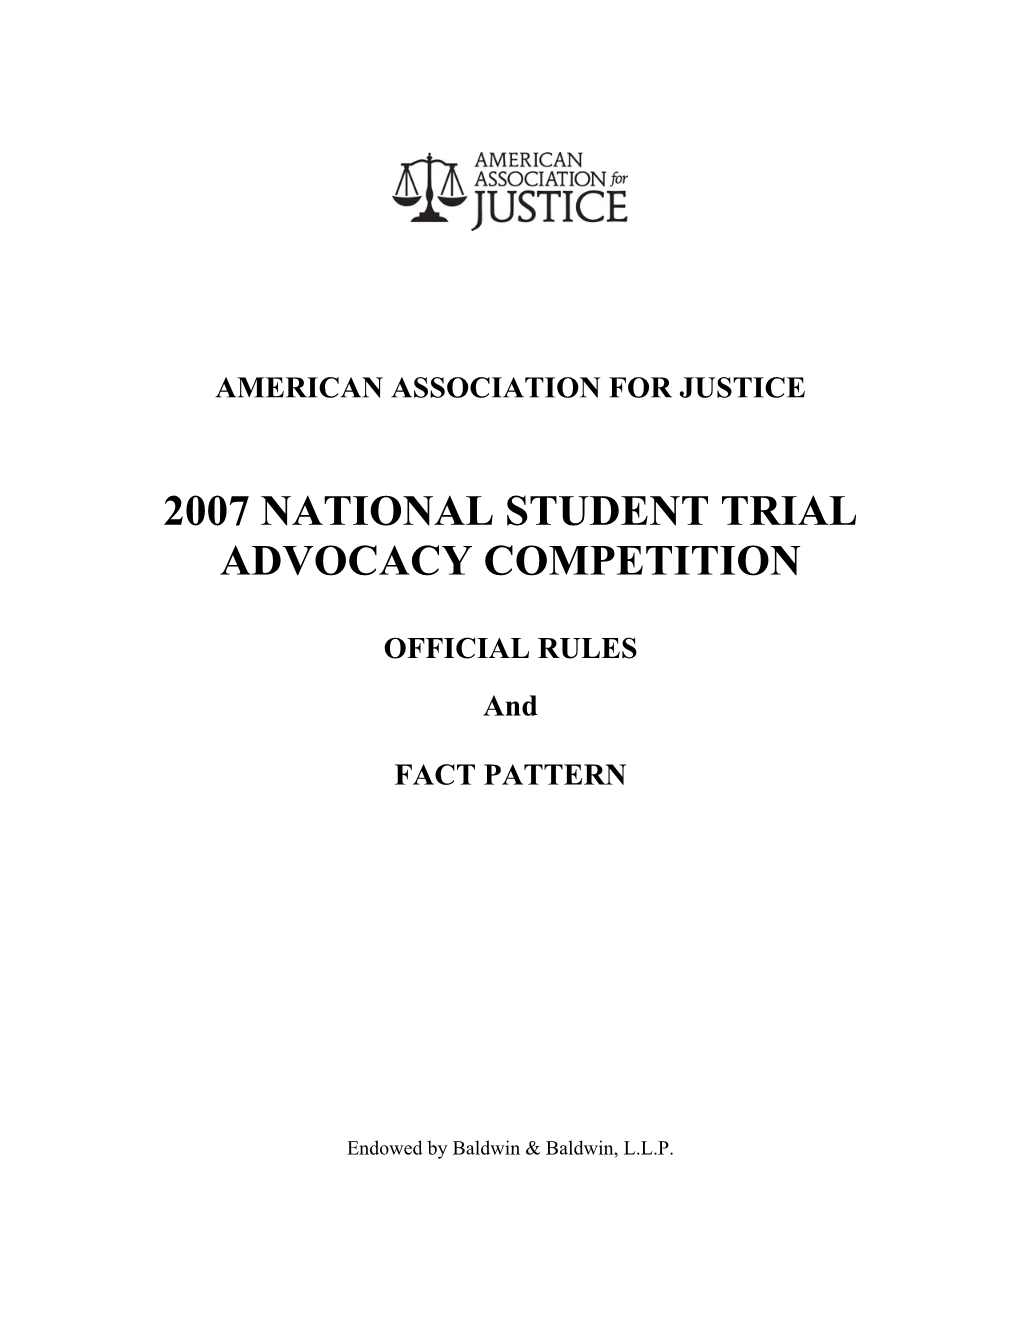 2007 National Student Trial Advocacy Competition